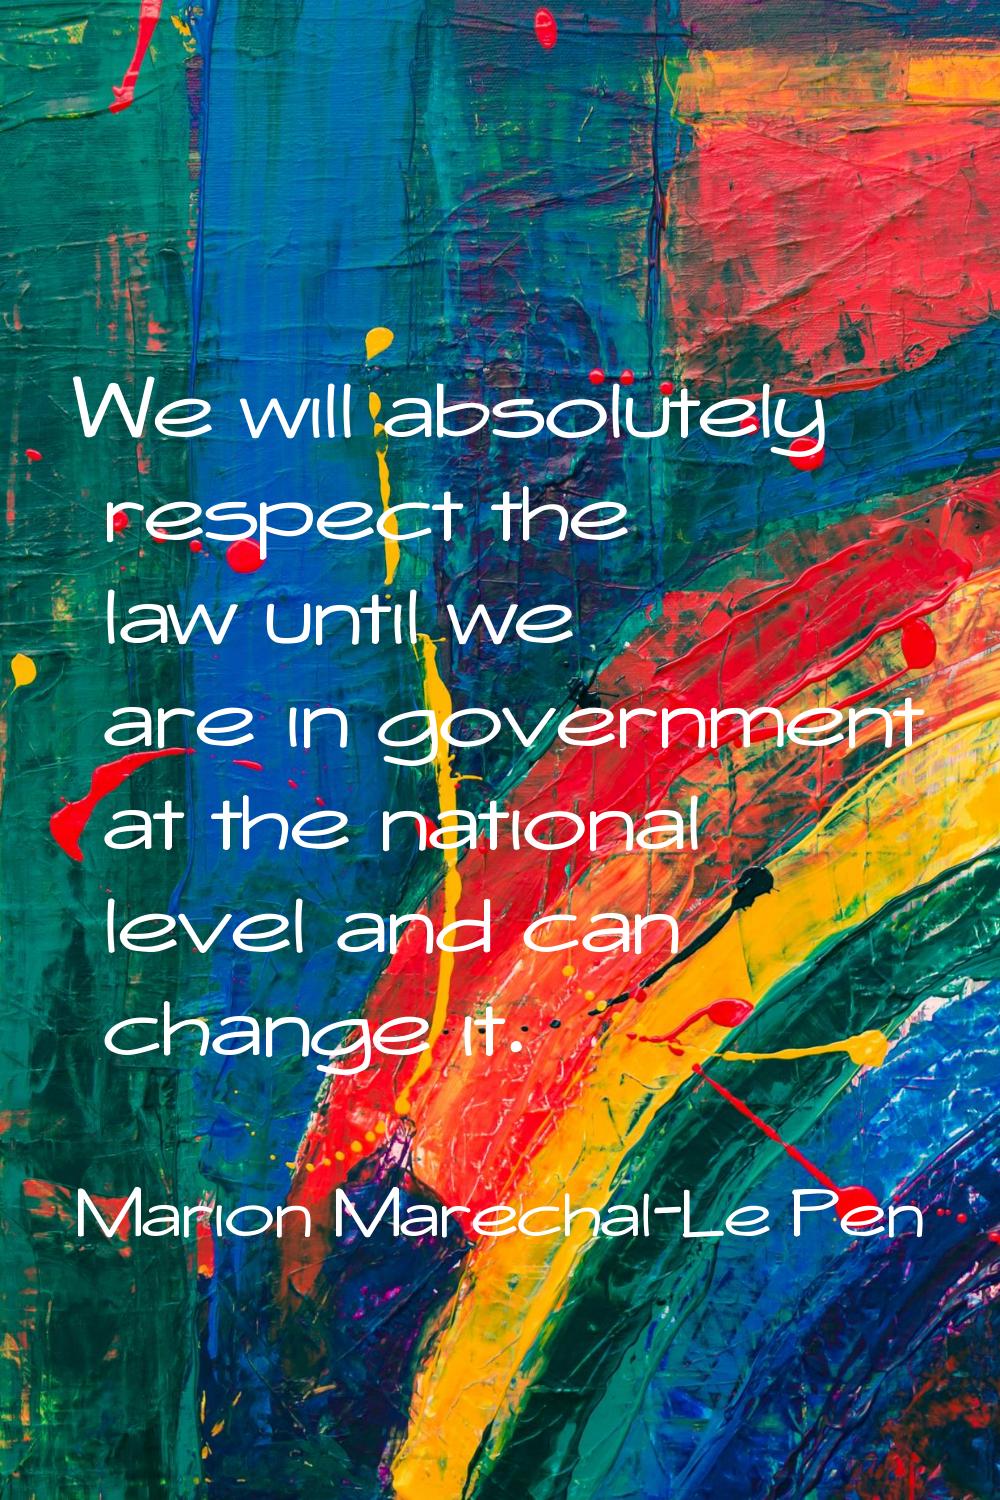 We will absolutely respect the law until we are in government at the national level and can change 